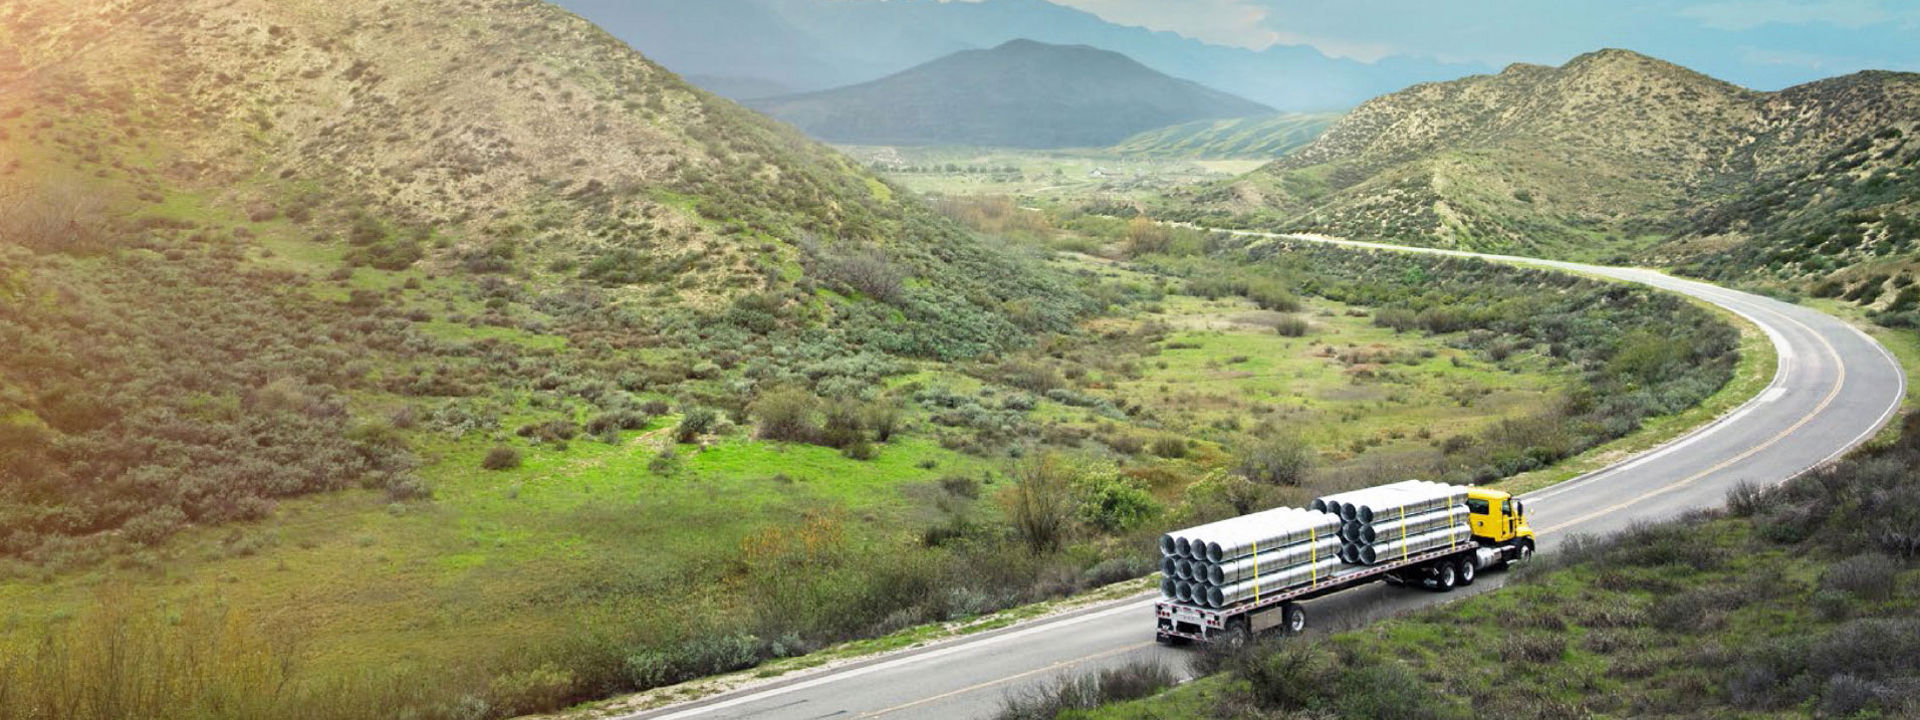 This image shows a side view of a commercial fleet driving on the road with Bridgestone truck tyres.